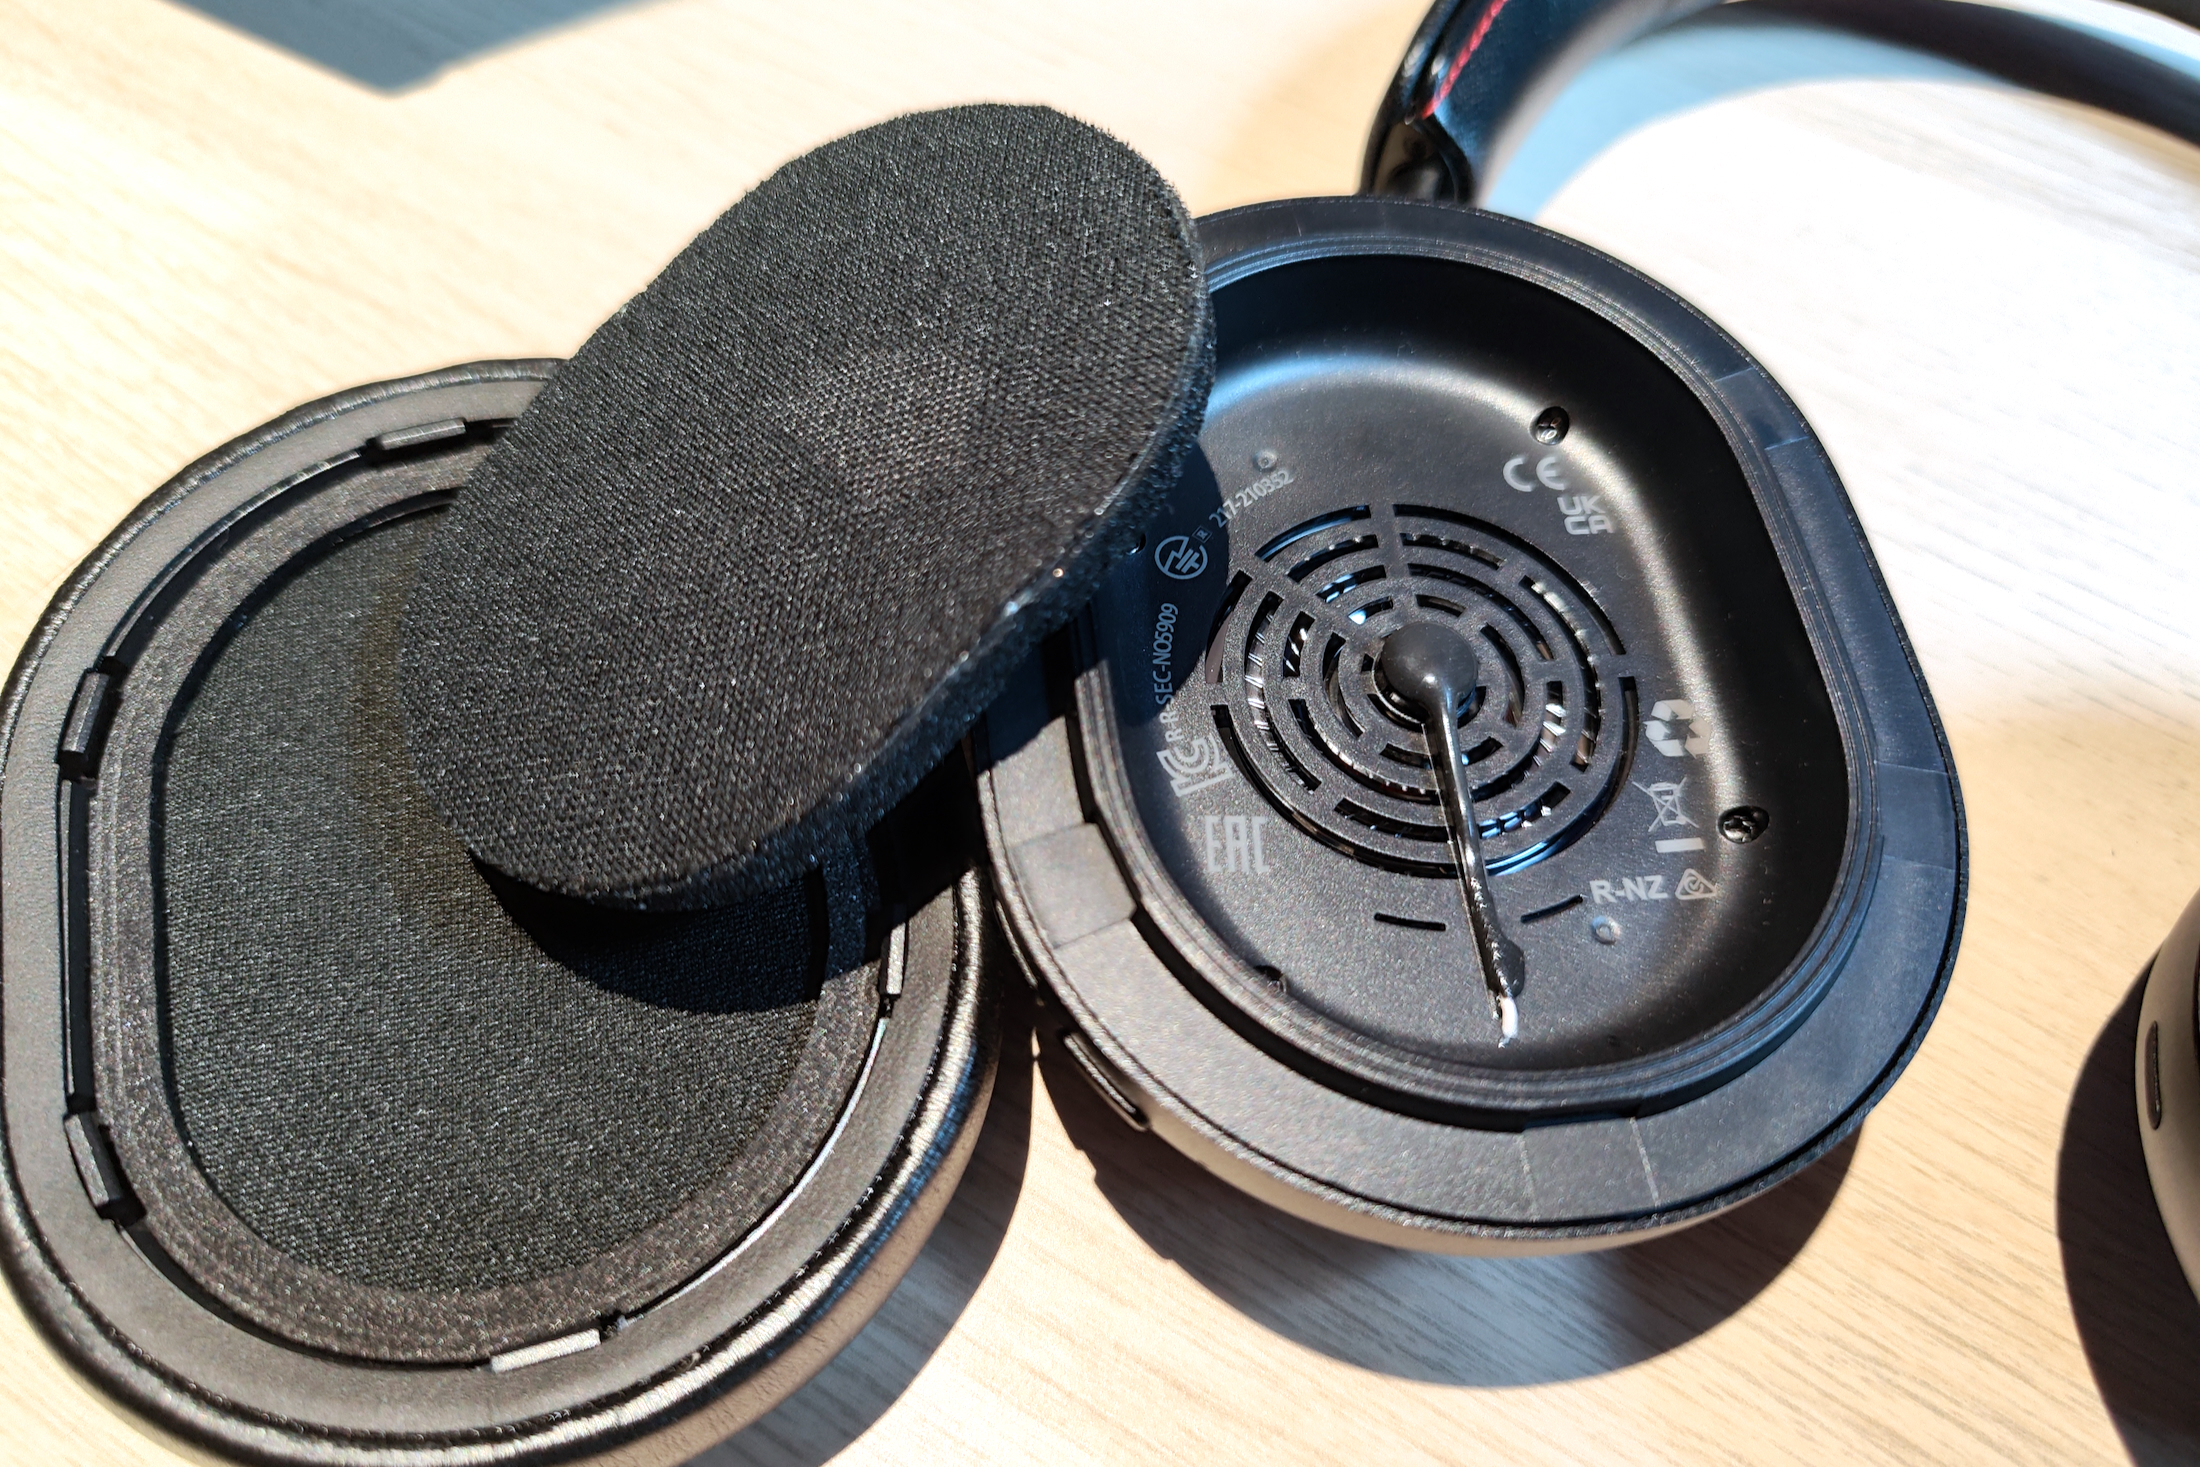 Mark Levinson No. 5909 headphones with ear cushion removed.